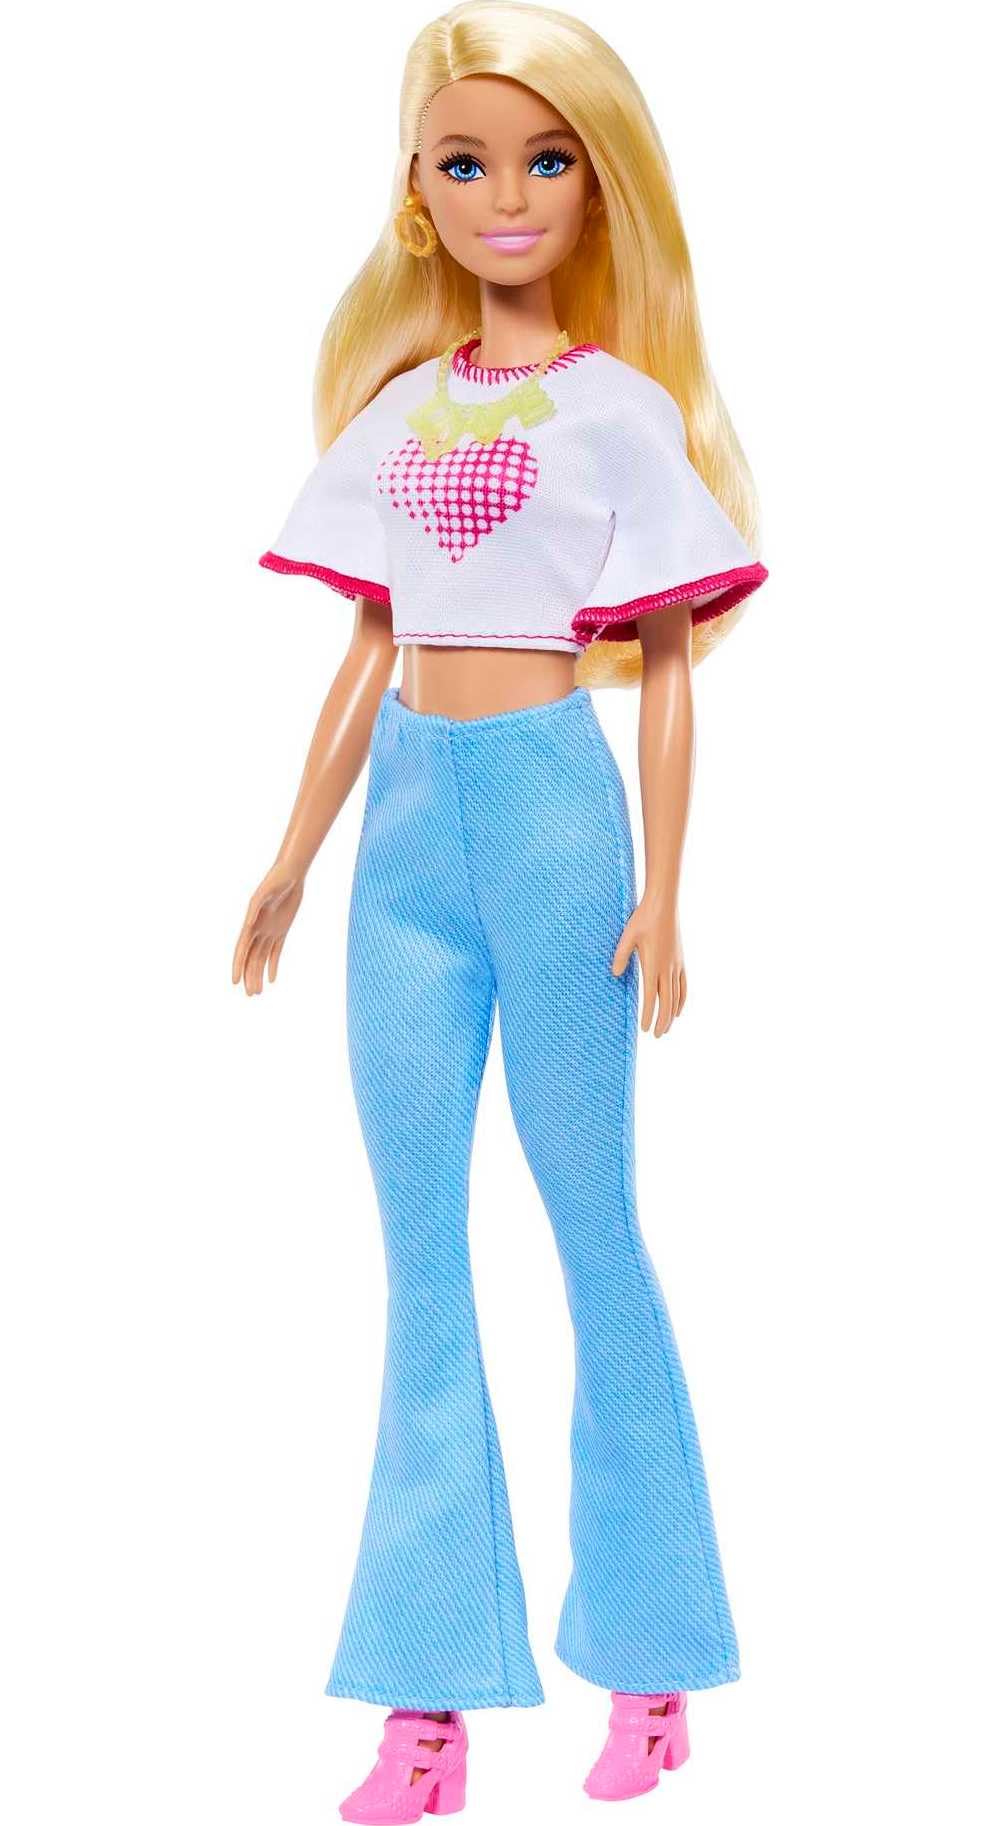 Barbie Doll and Ken Doll Fashion Set with Clothes and Accessories, Dresses, Tees, Pants, Swimsuits and More [Amazon Exclusive]